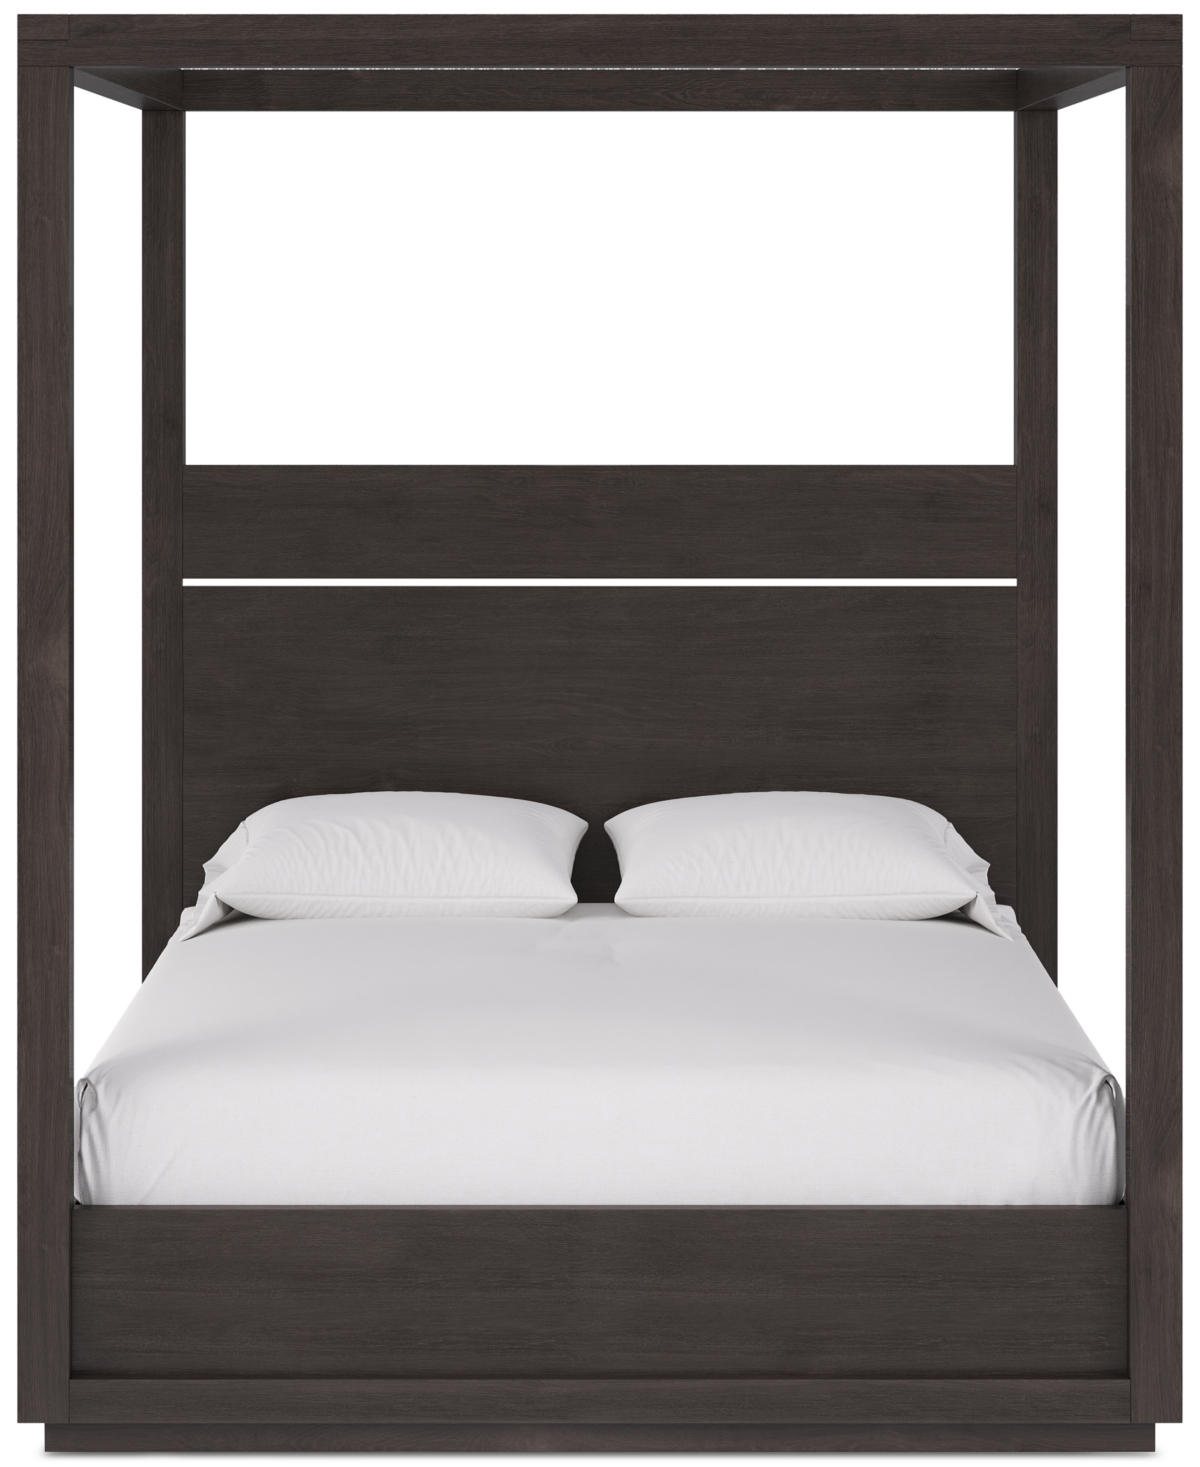 Macy's Tivie 3pc Bedroom Set (california King Canopy Bed + Dresser + Nightstand), Created For  In Brown